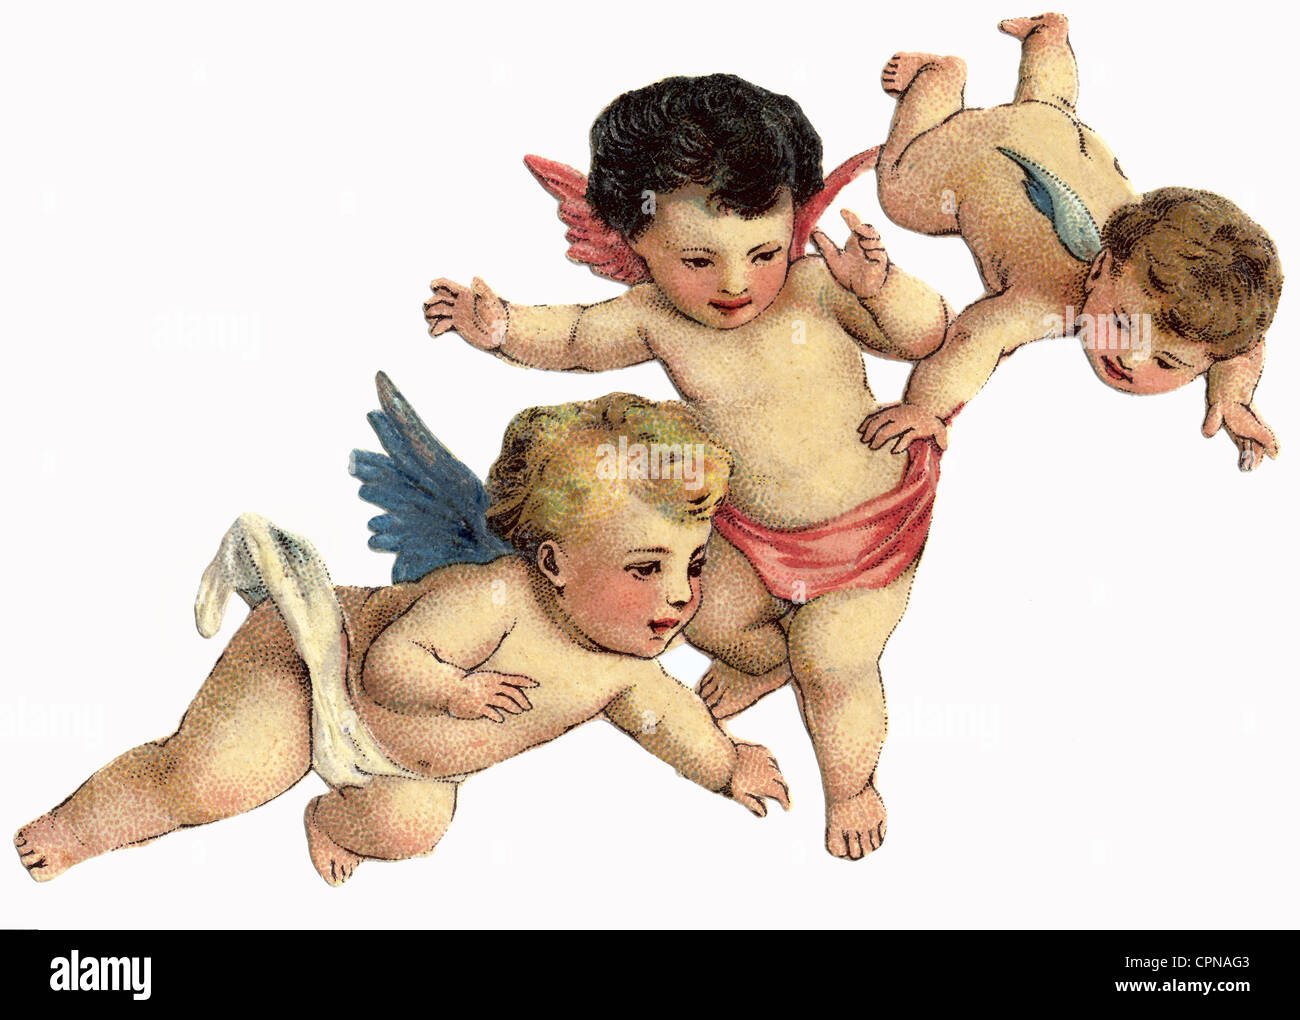 kitsch, three flying little angel, scrap-picture, lithograph, Germany, circa 1900, putt, putto, cherub, angels, flying, three, 3, scrap picture, scrap pictures, glossy prints, scrap-picture, scraps, chromos, scrap-pictures, cute, cuter, cutest, lithograph, lithographing, clipping, cut out, cut-out, cut-outs, still, little angel, angelet, floating, baby, babies, children, child, kids, kid, infant, infants, historic, historical, 20th century, nostalgia, 1900s, Additional-Rights-Clearences-Not Available Stock Photo